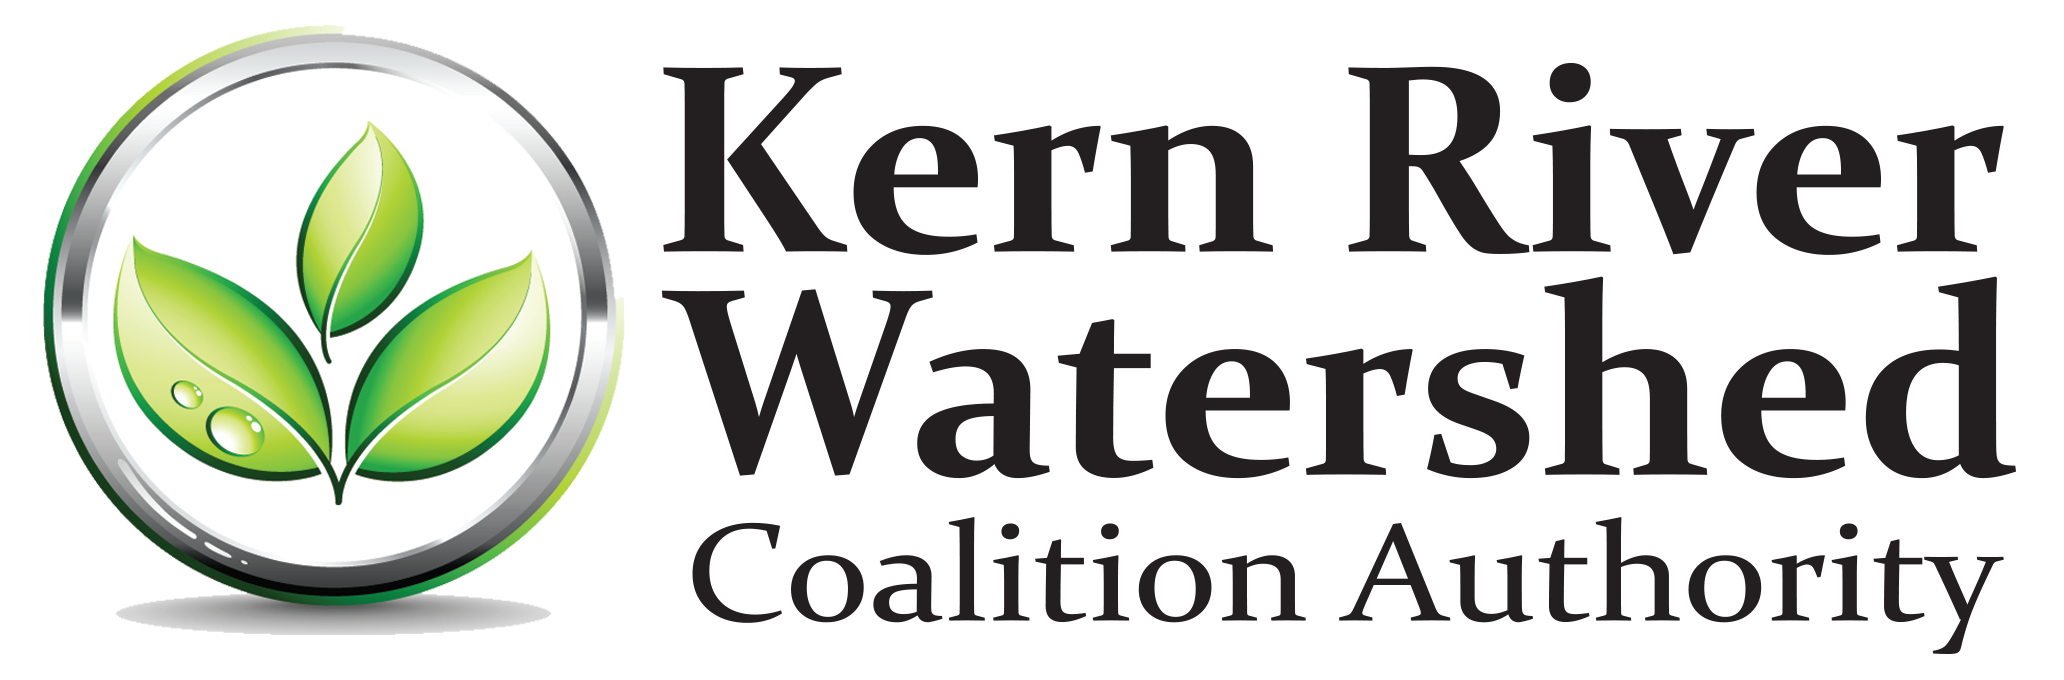 Kern River Watershed Coalition Authority